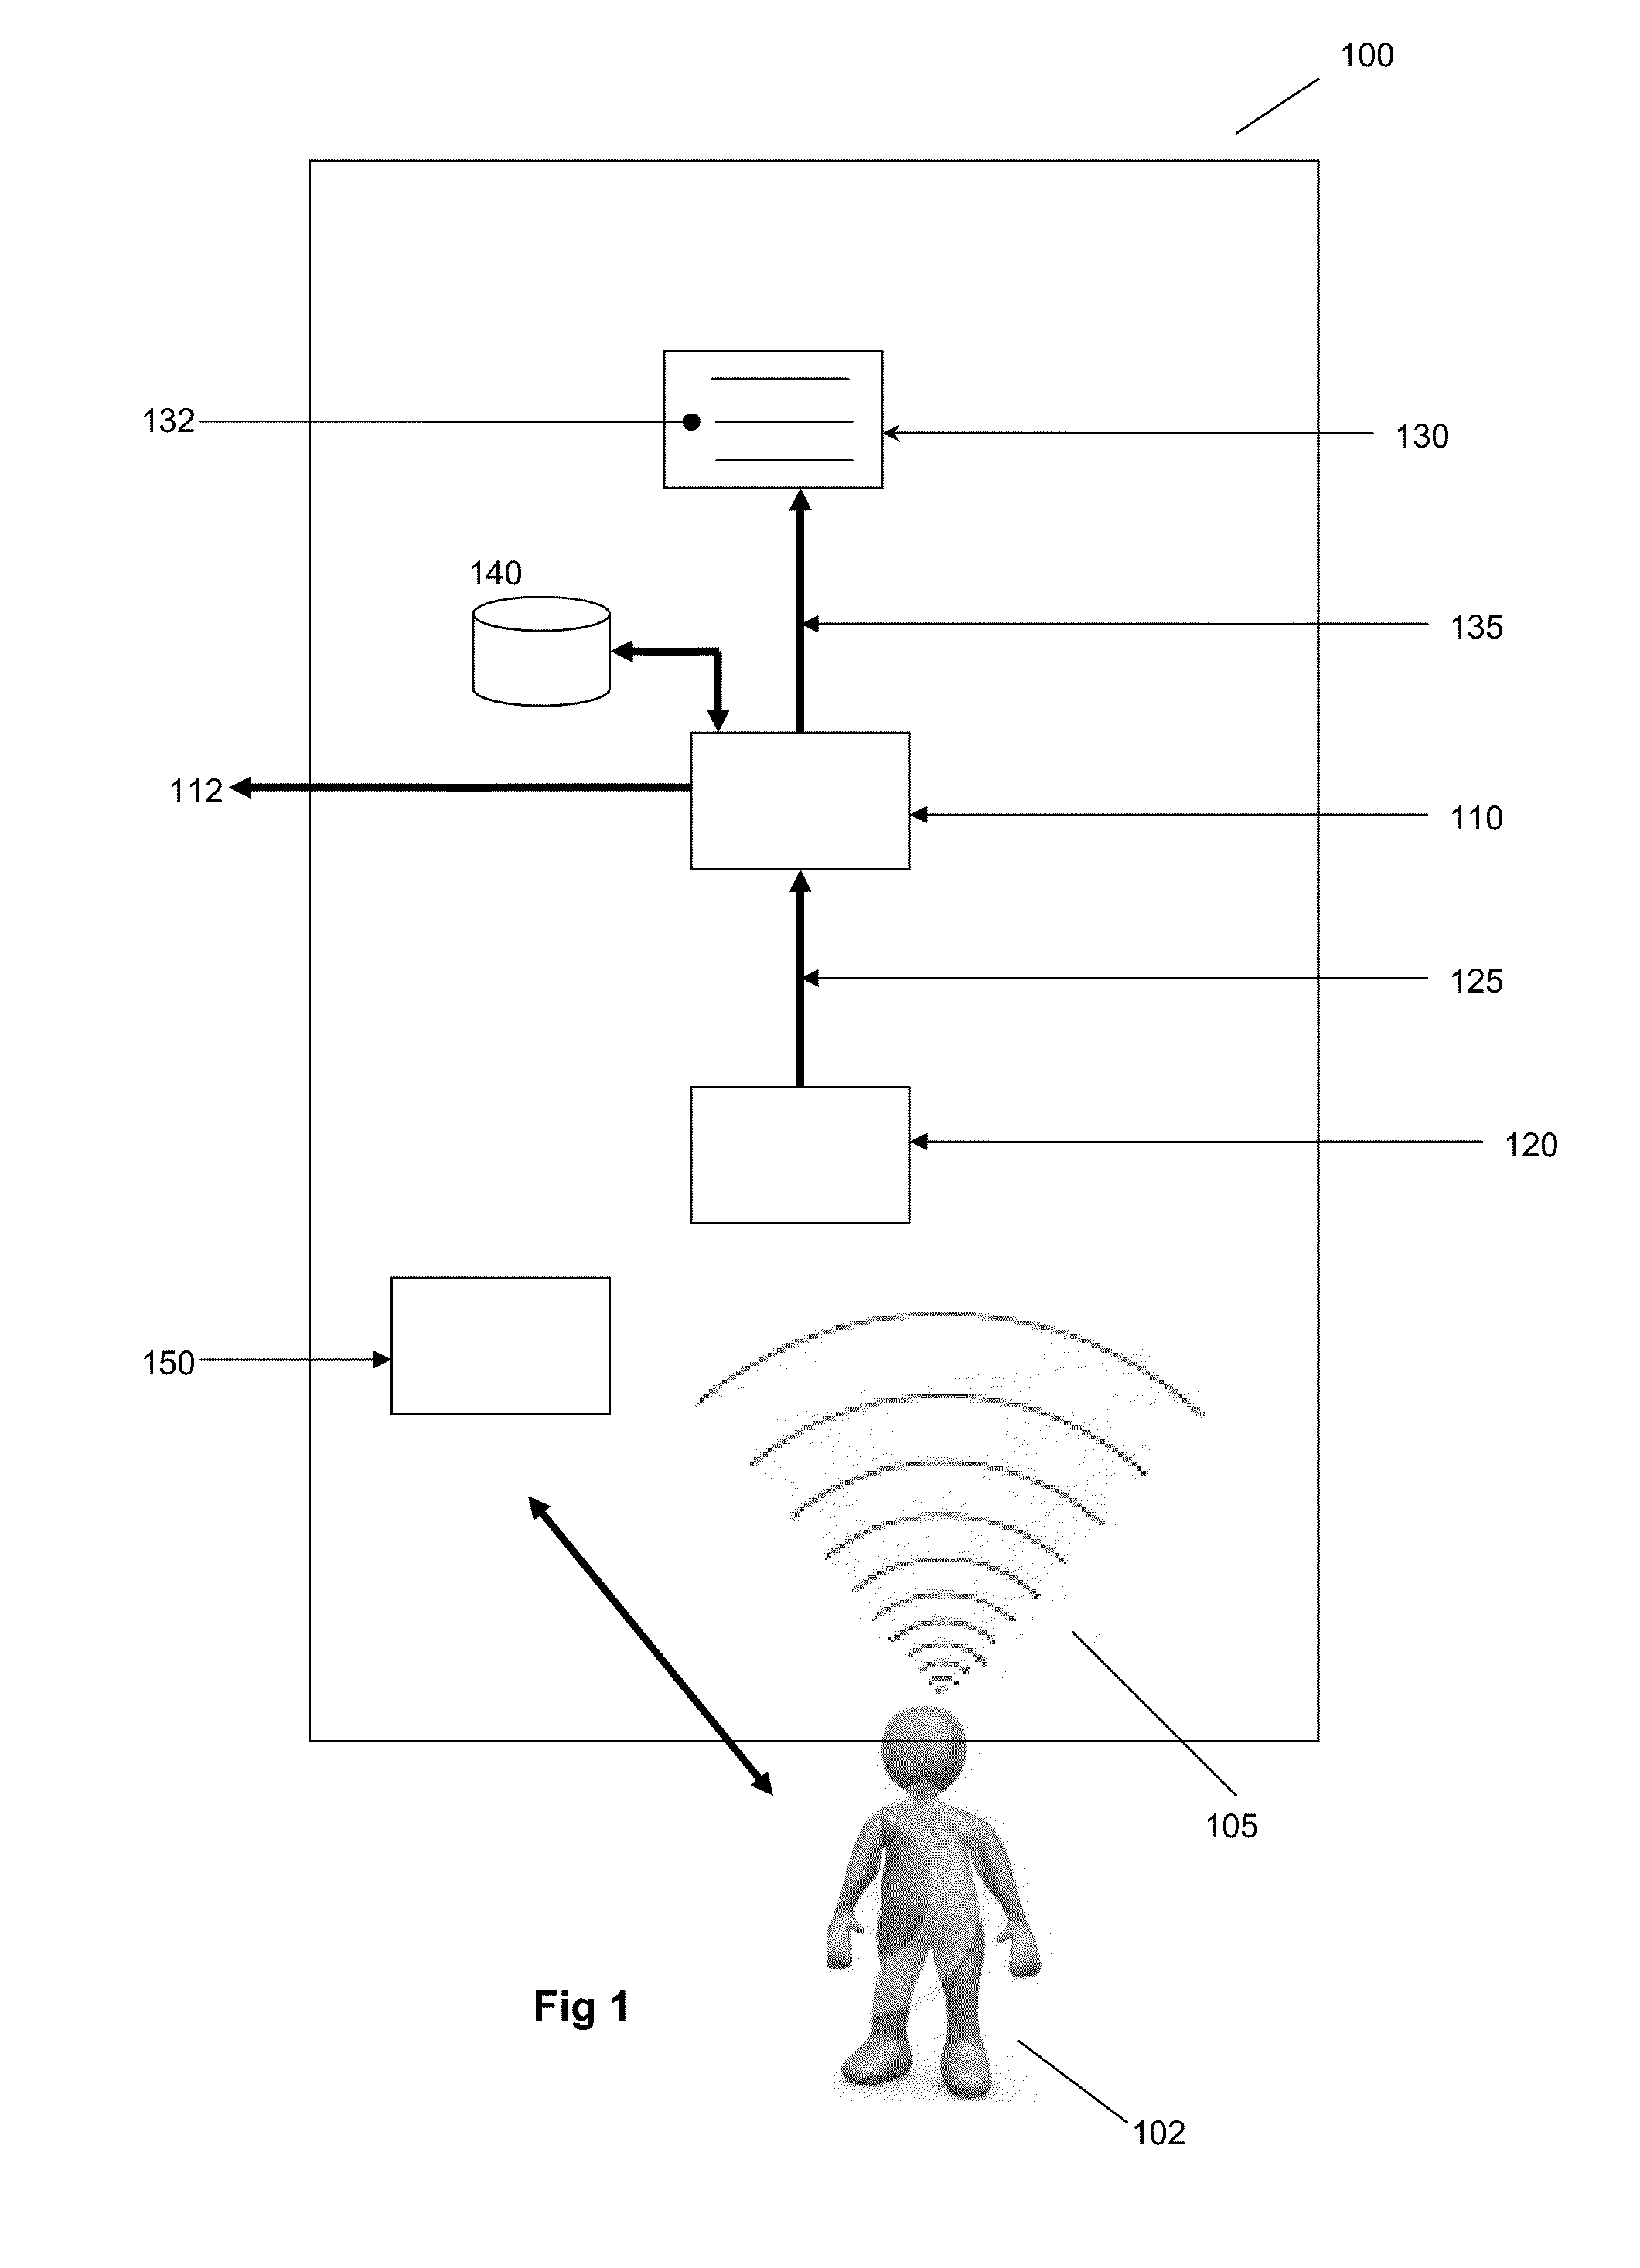 Remote control system and device